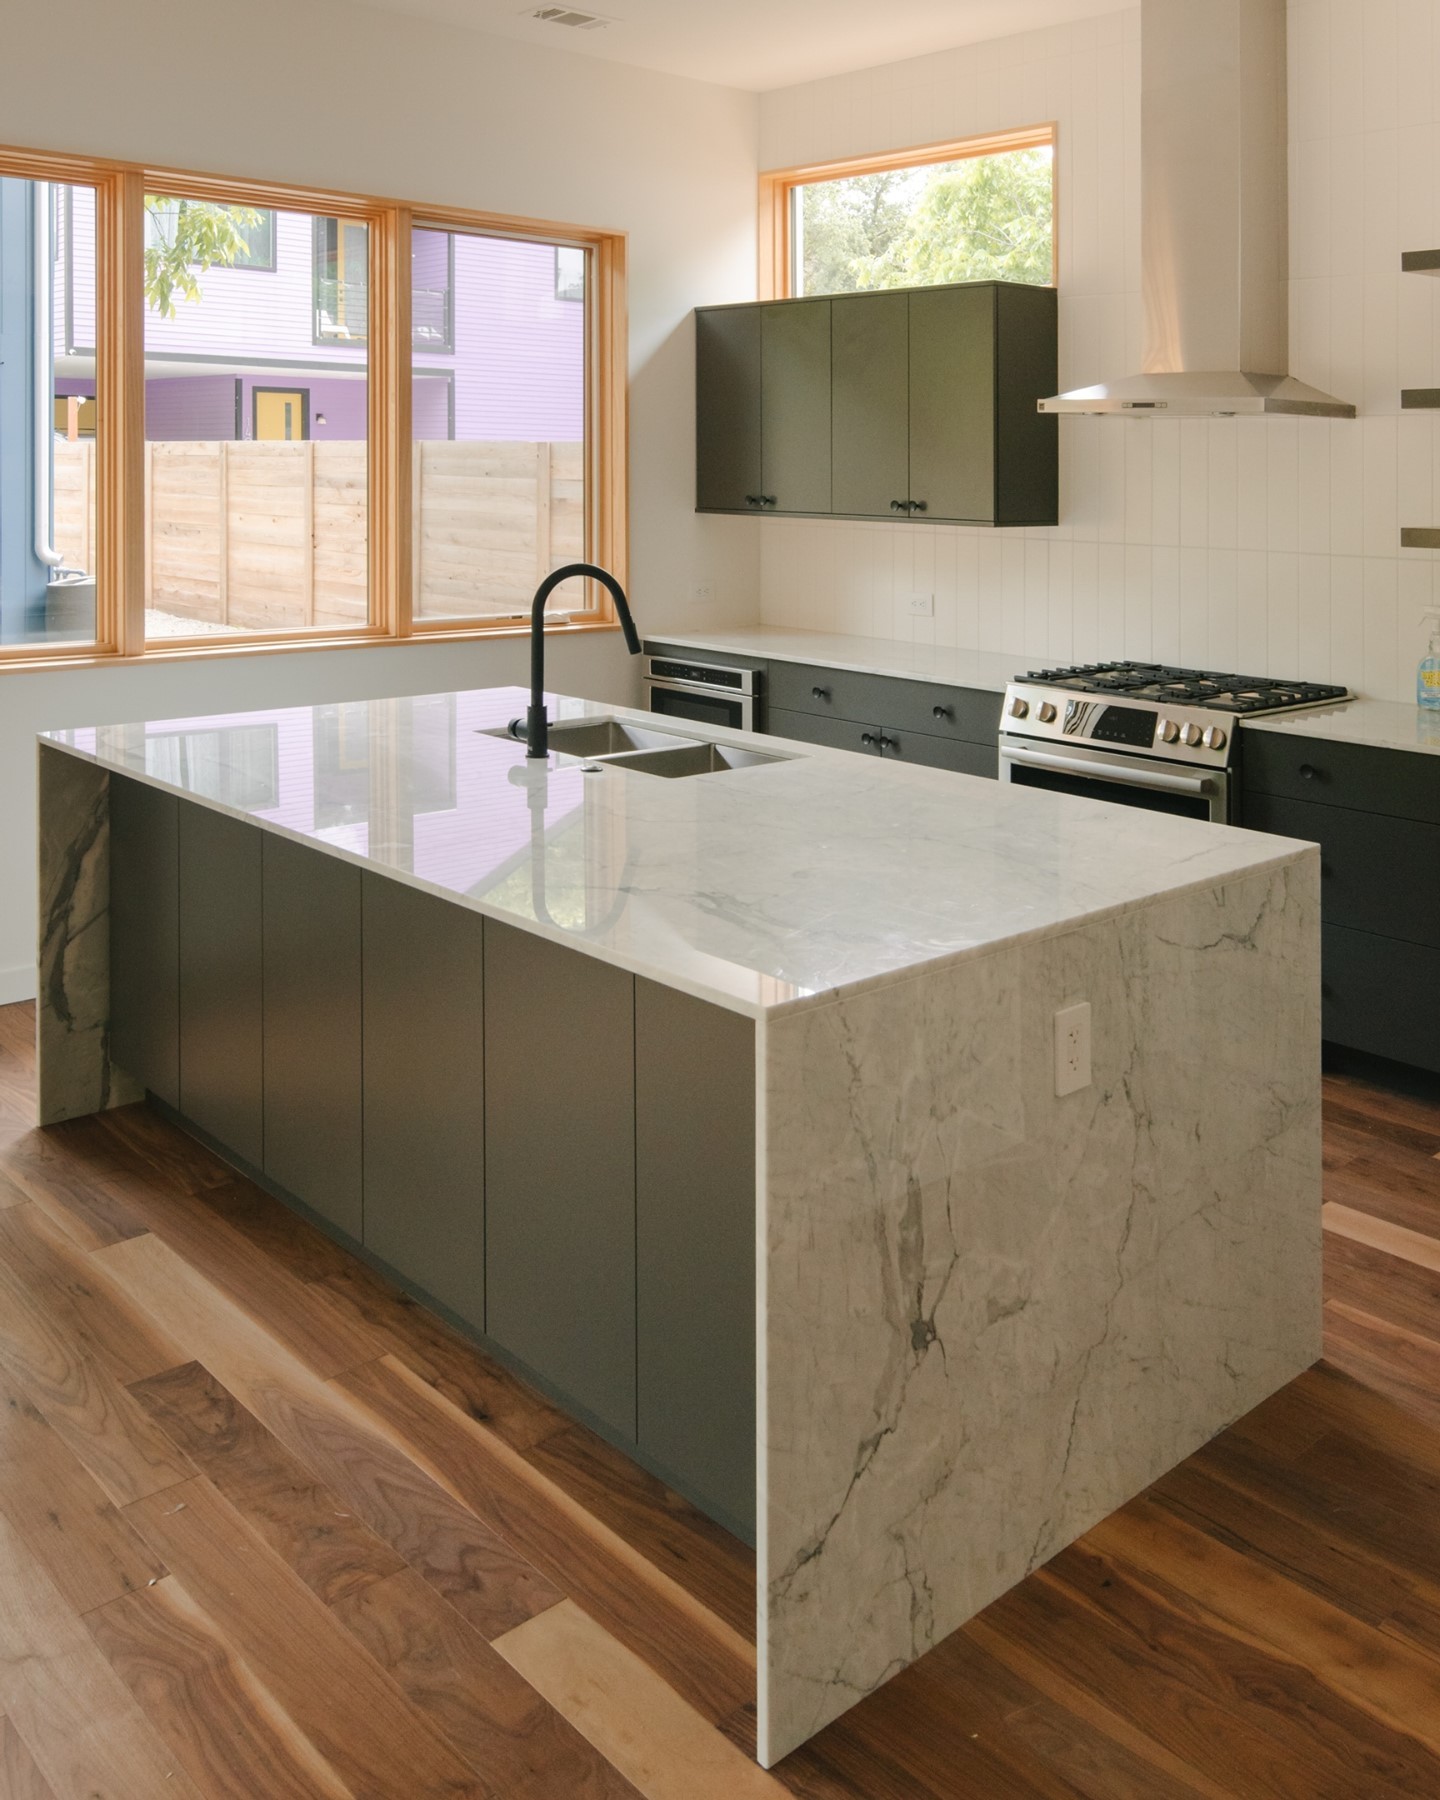 Between its marble island, dark cabinetry, and natural wood flooring, this kitchen represents the perfect amount of balance. ⚖️⁠
⁠
Photo: @caseychap